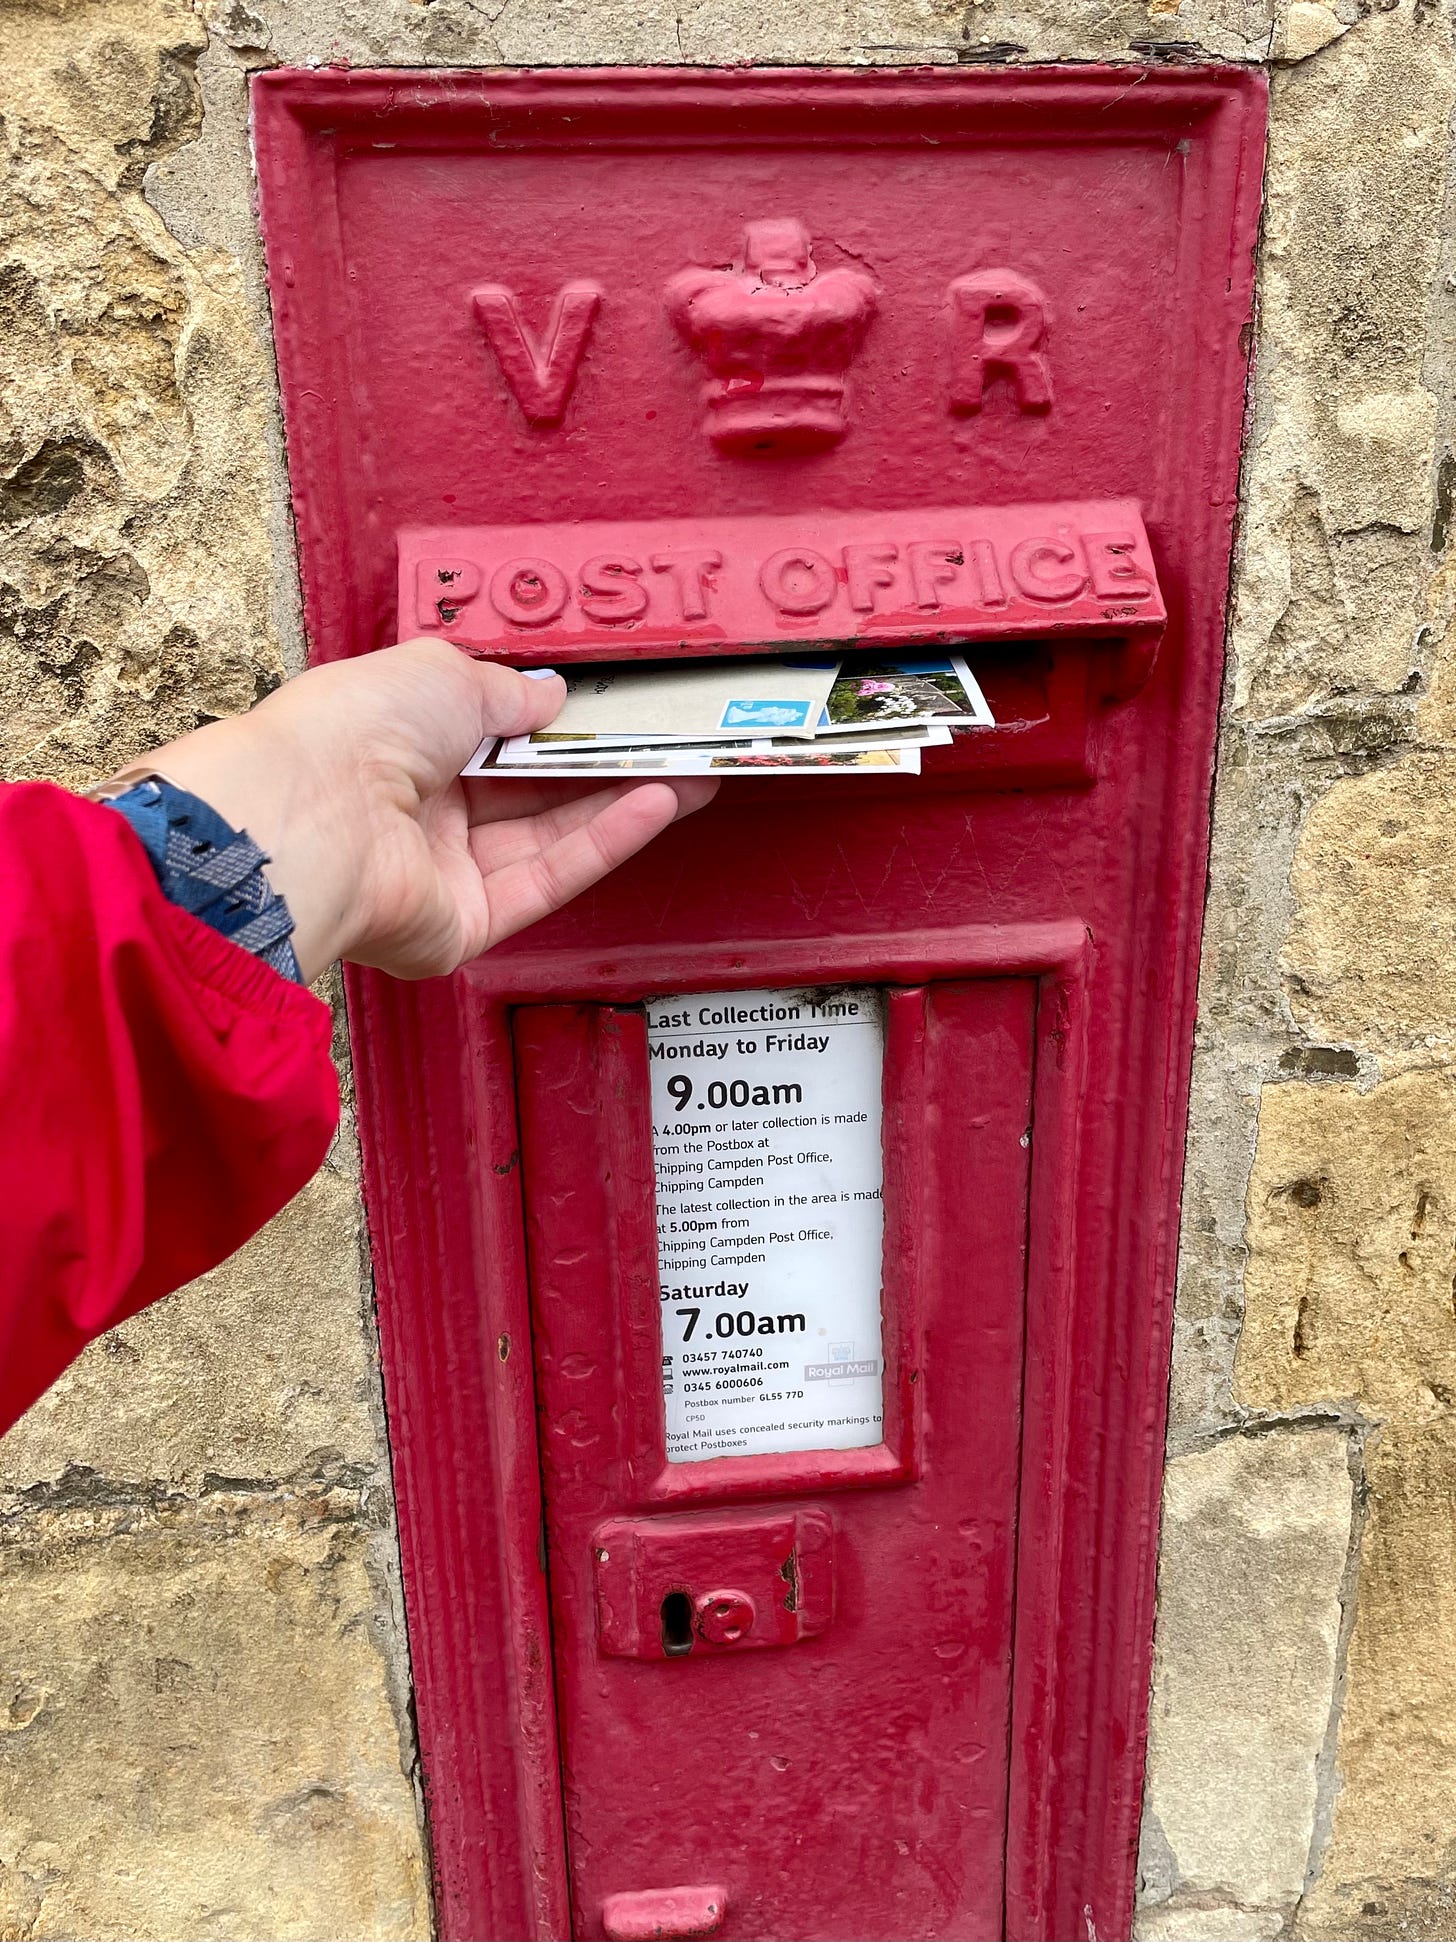 A woman puts a handful of postcards and letters into a red postbox built into a stone wall in Chipping Campden, England.